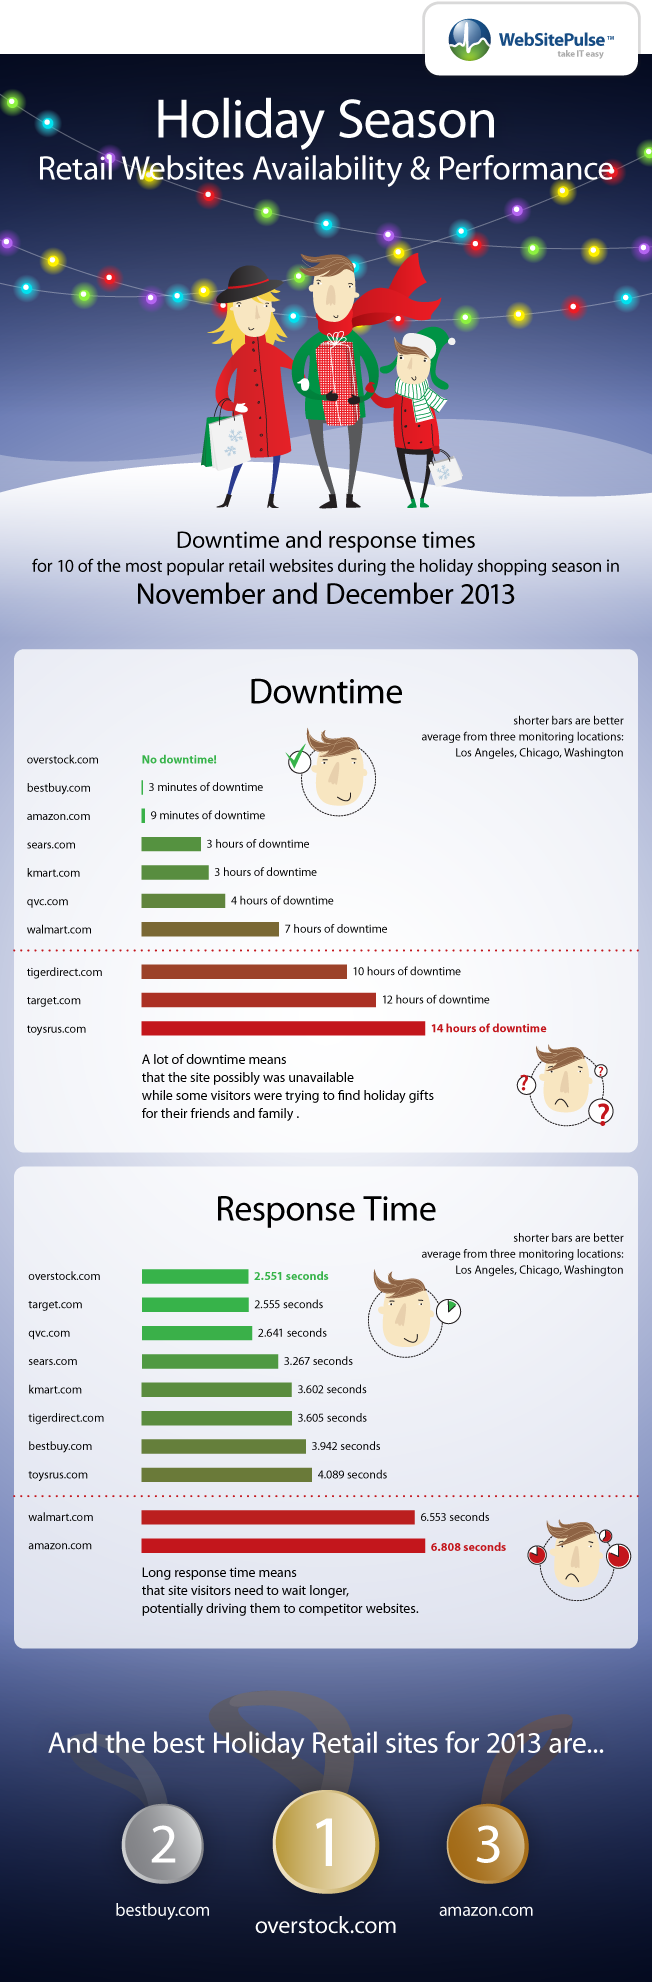 2013 Holiday Season retail websites downtime and response times